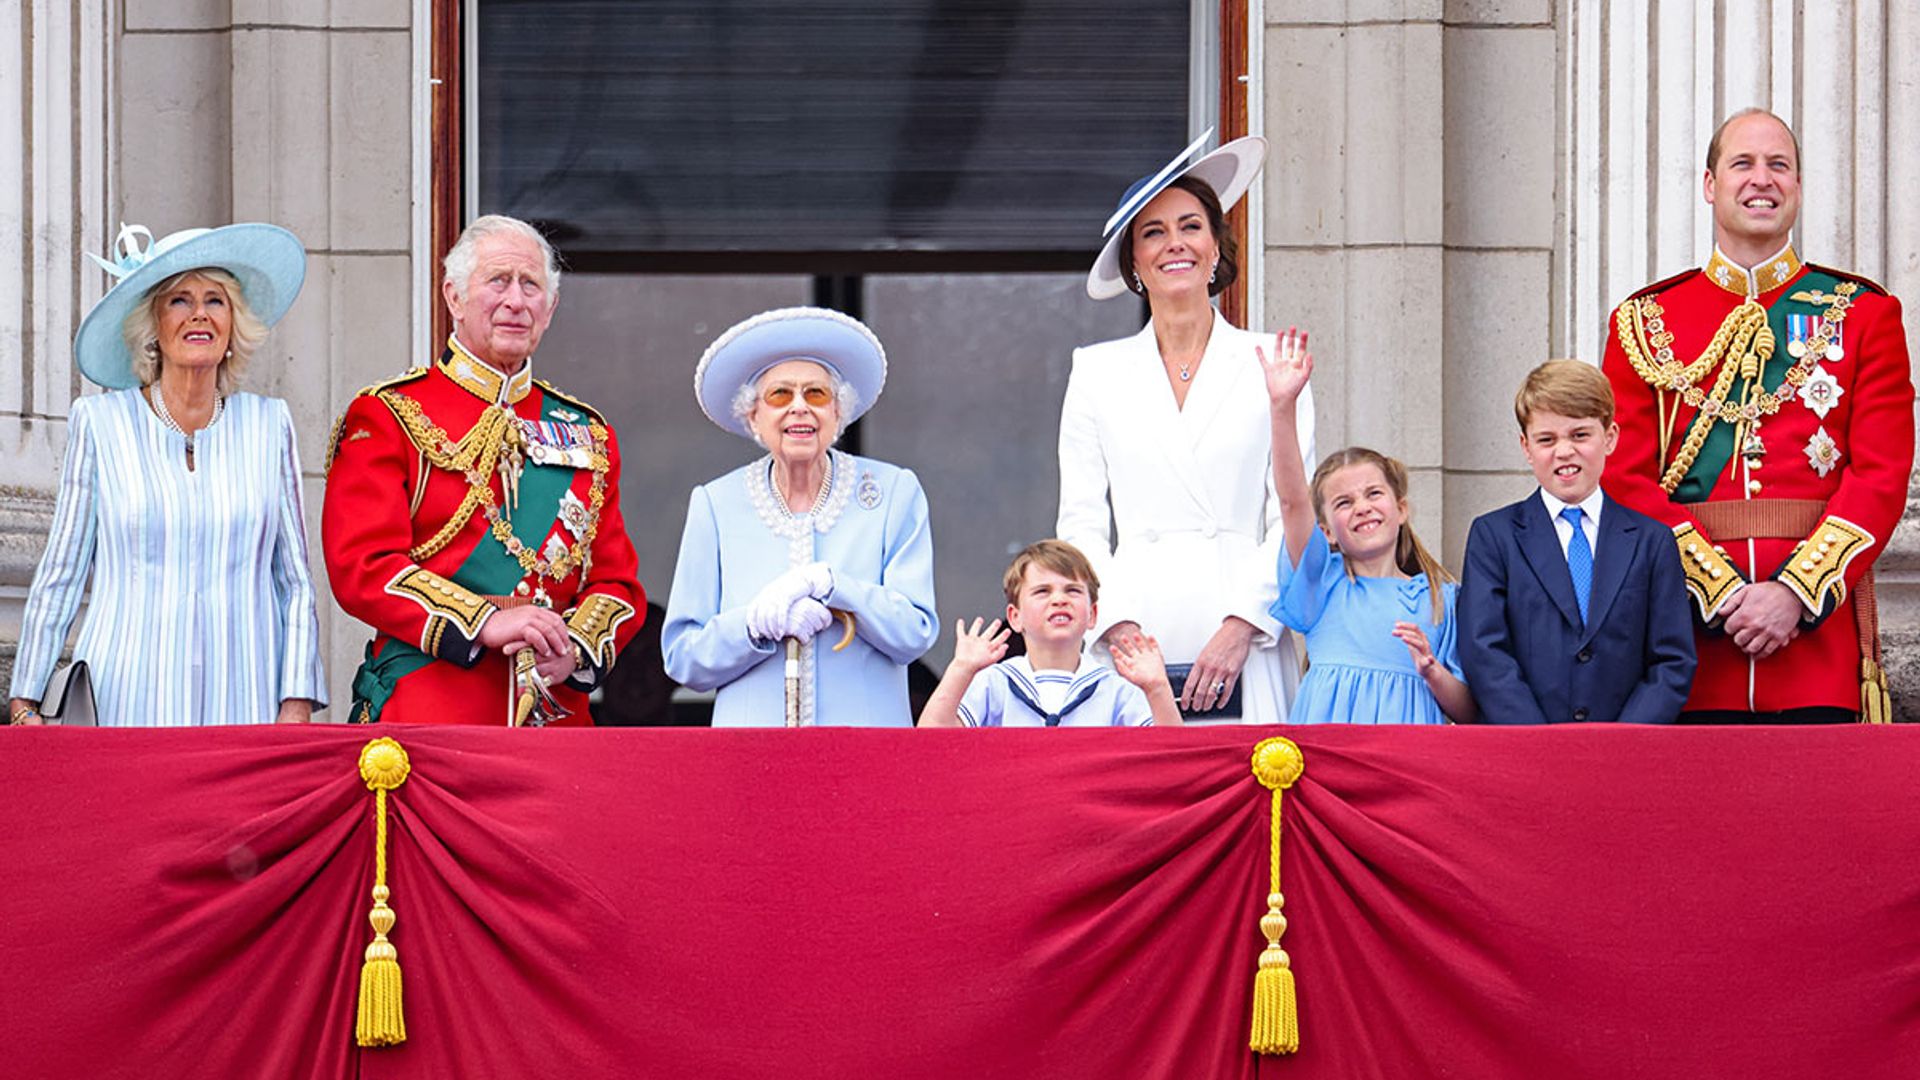 The Queen joined by Kate Middleton and royal family on iconic balcony